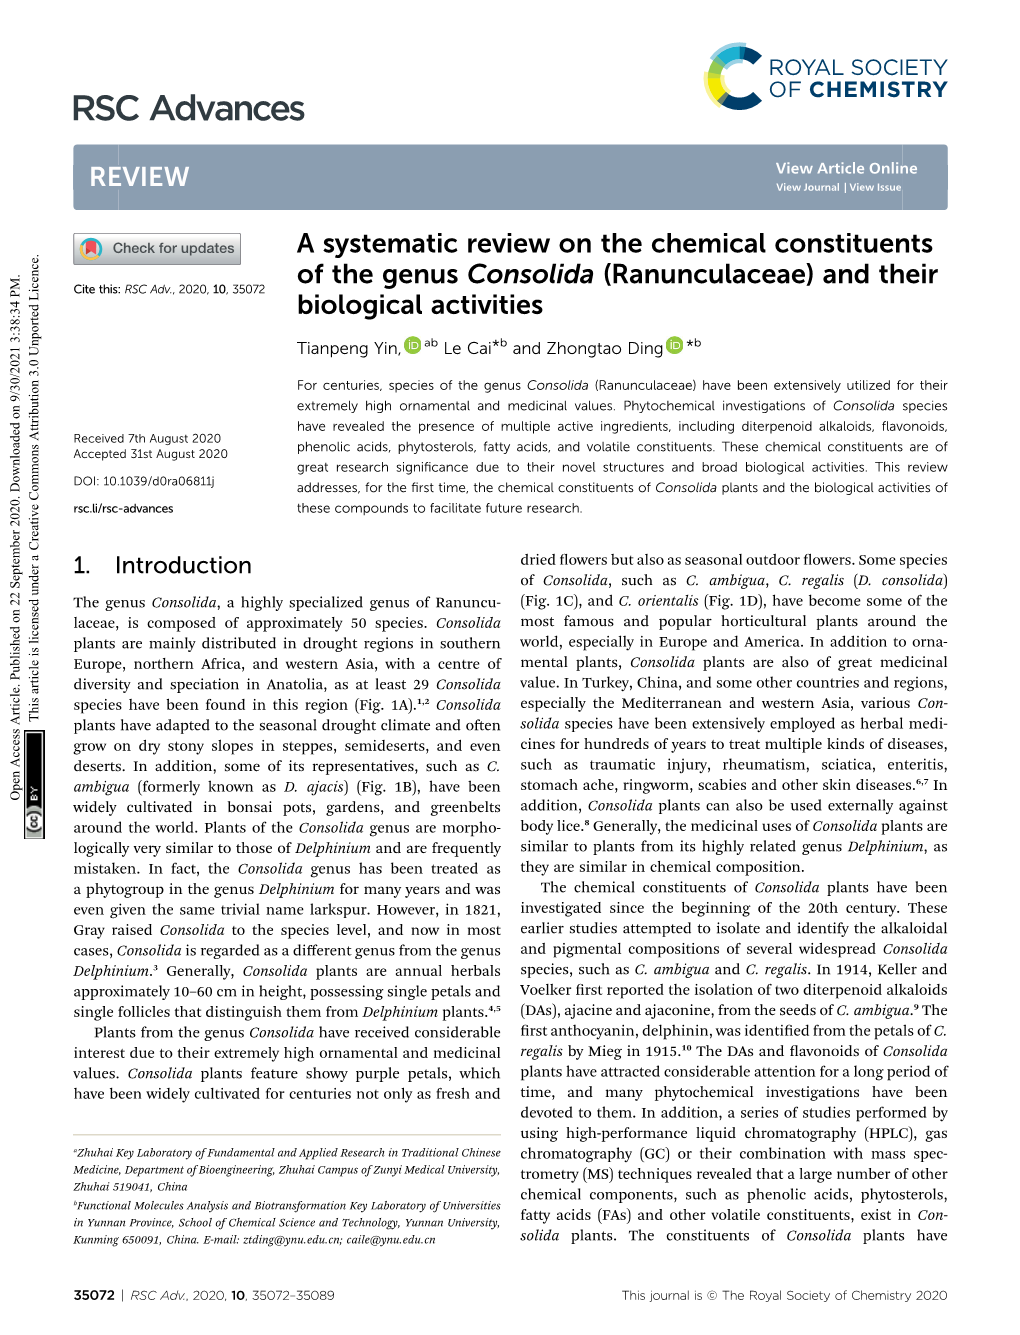 A Systematic Review on the Chemical Constituents of the Genus Consolida (Ranunculaceae) and Their Cite This: RSC Adv., 2020, 10,35072 Biological Activities